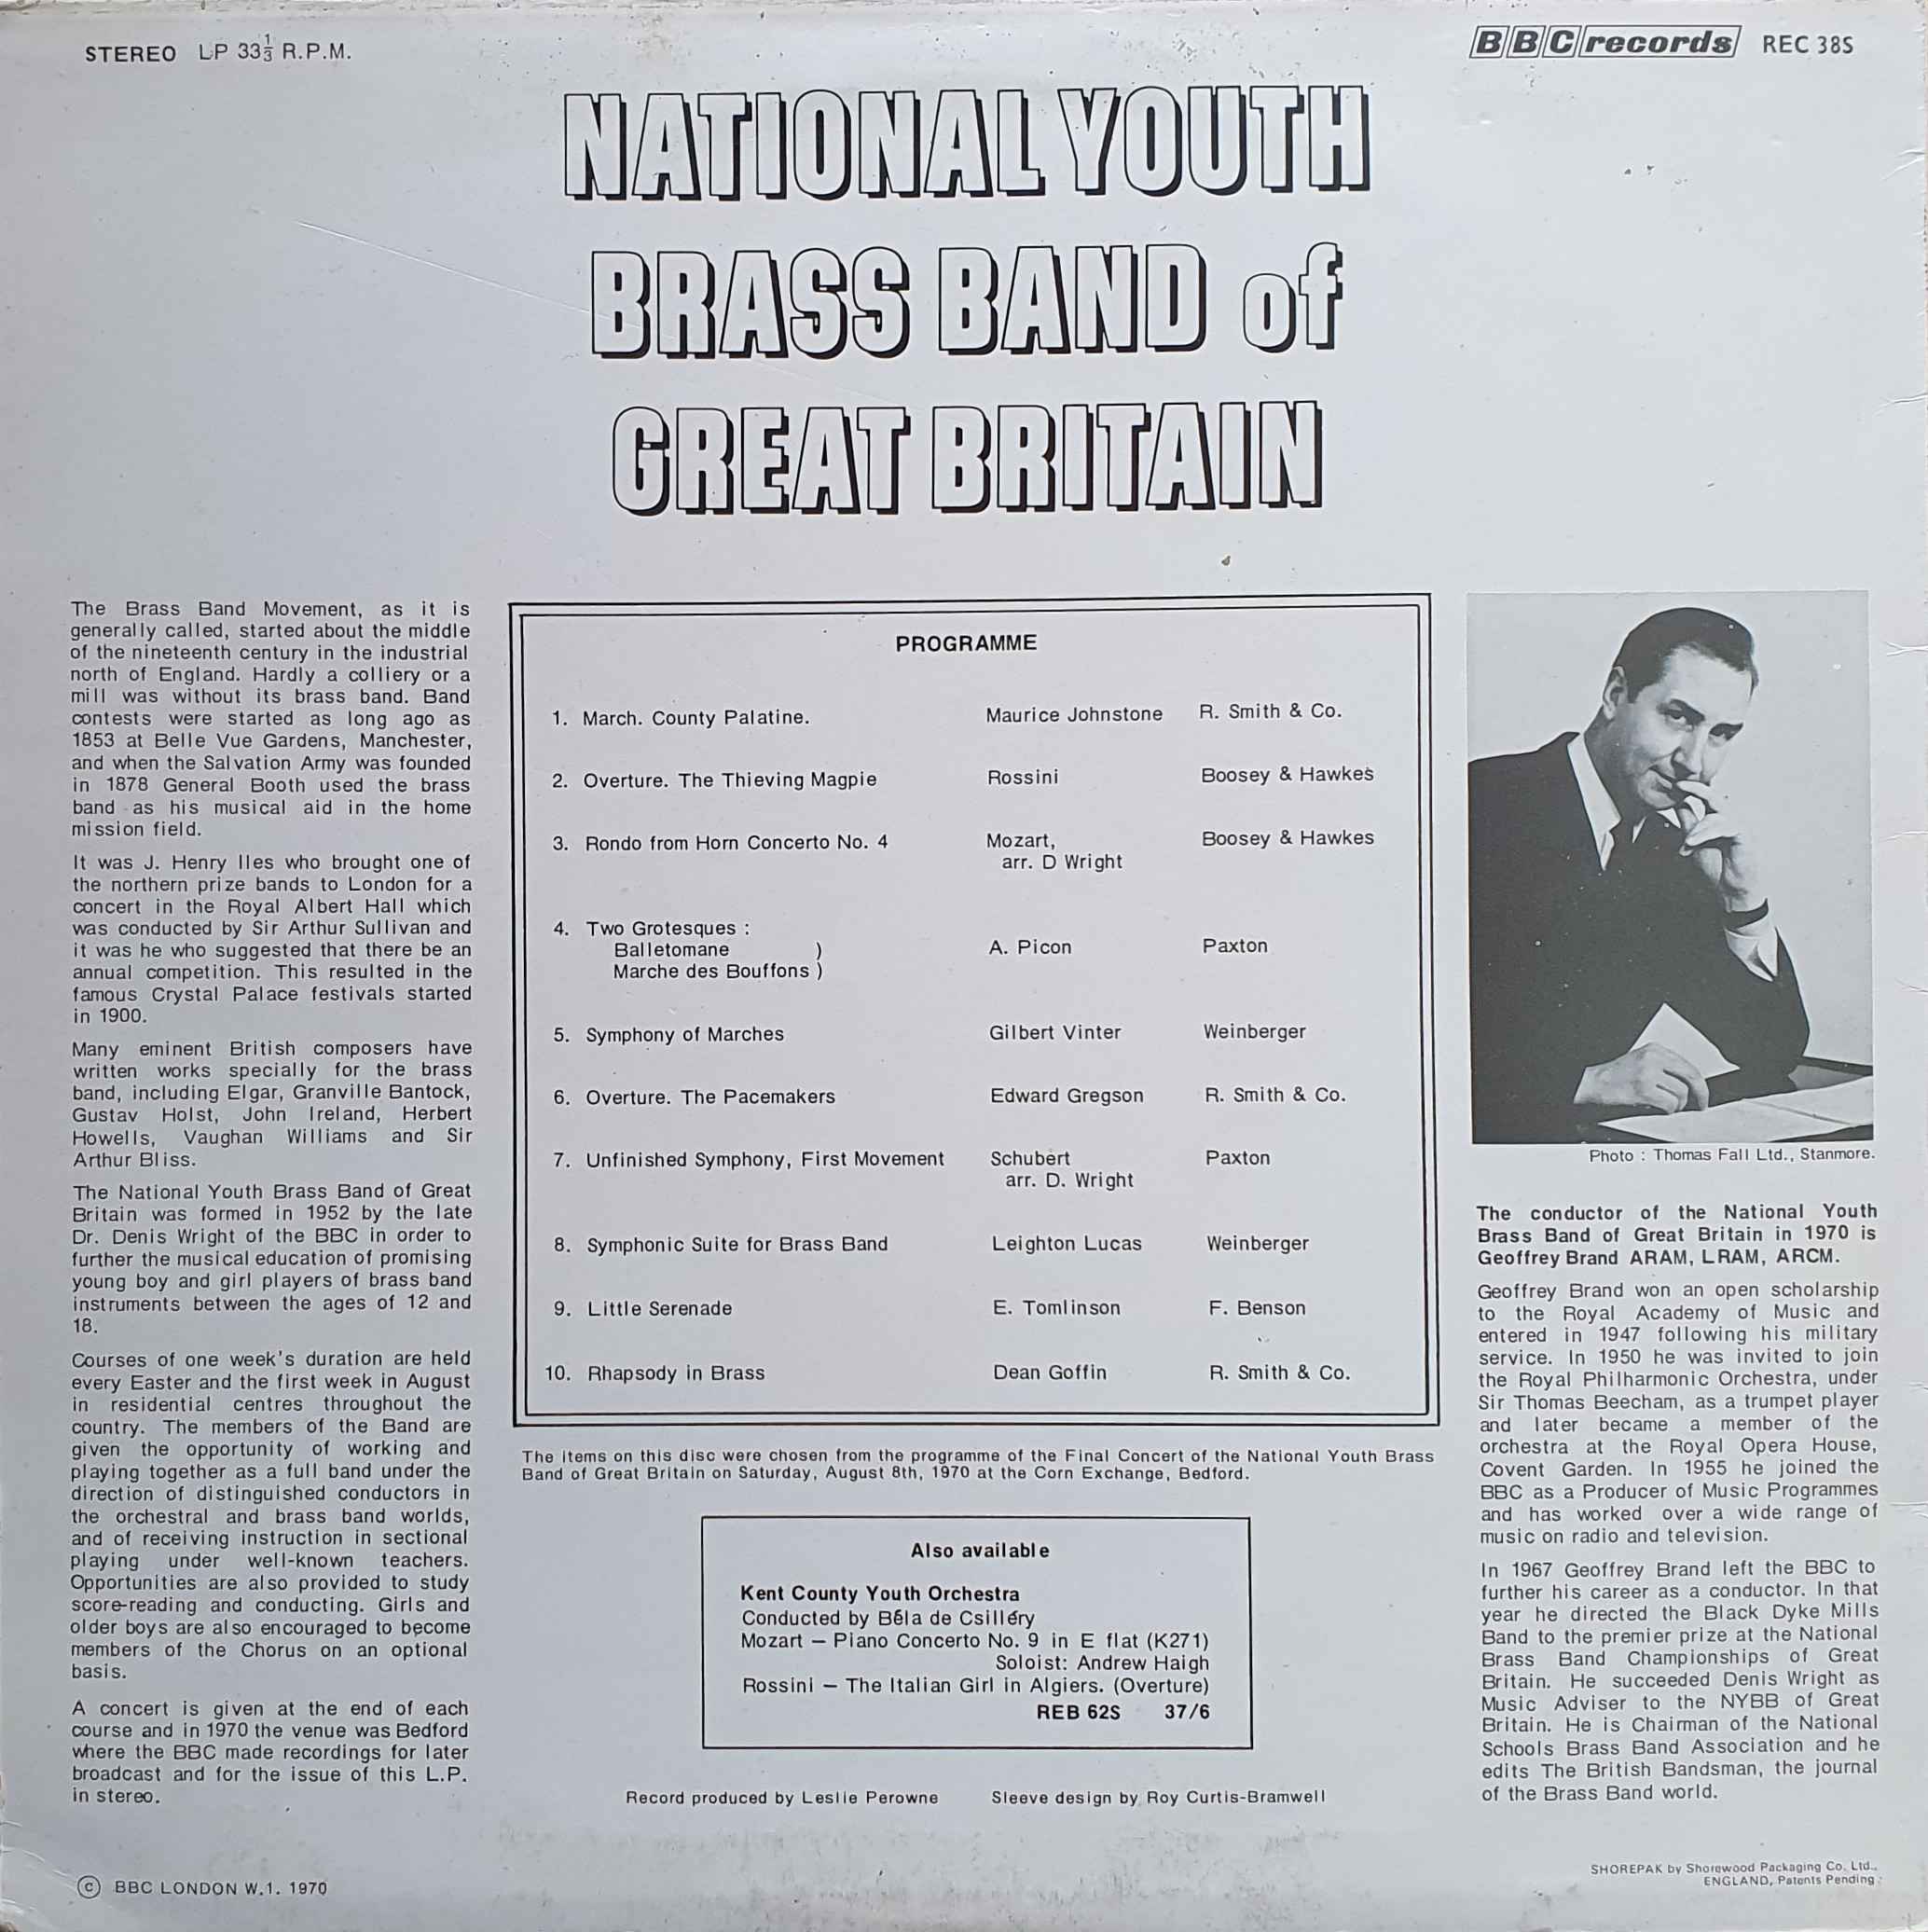 Picture of REC 38 National youth brass band of Great Britain by artist Various from the BBC records and Tapes library